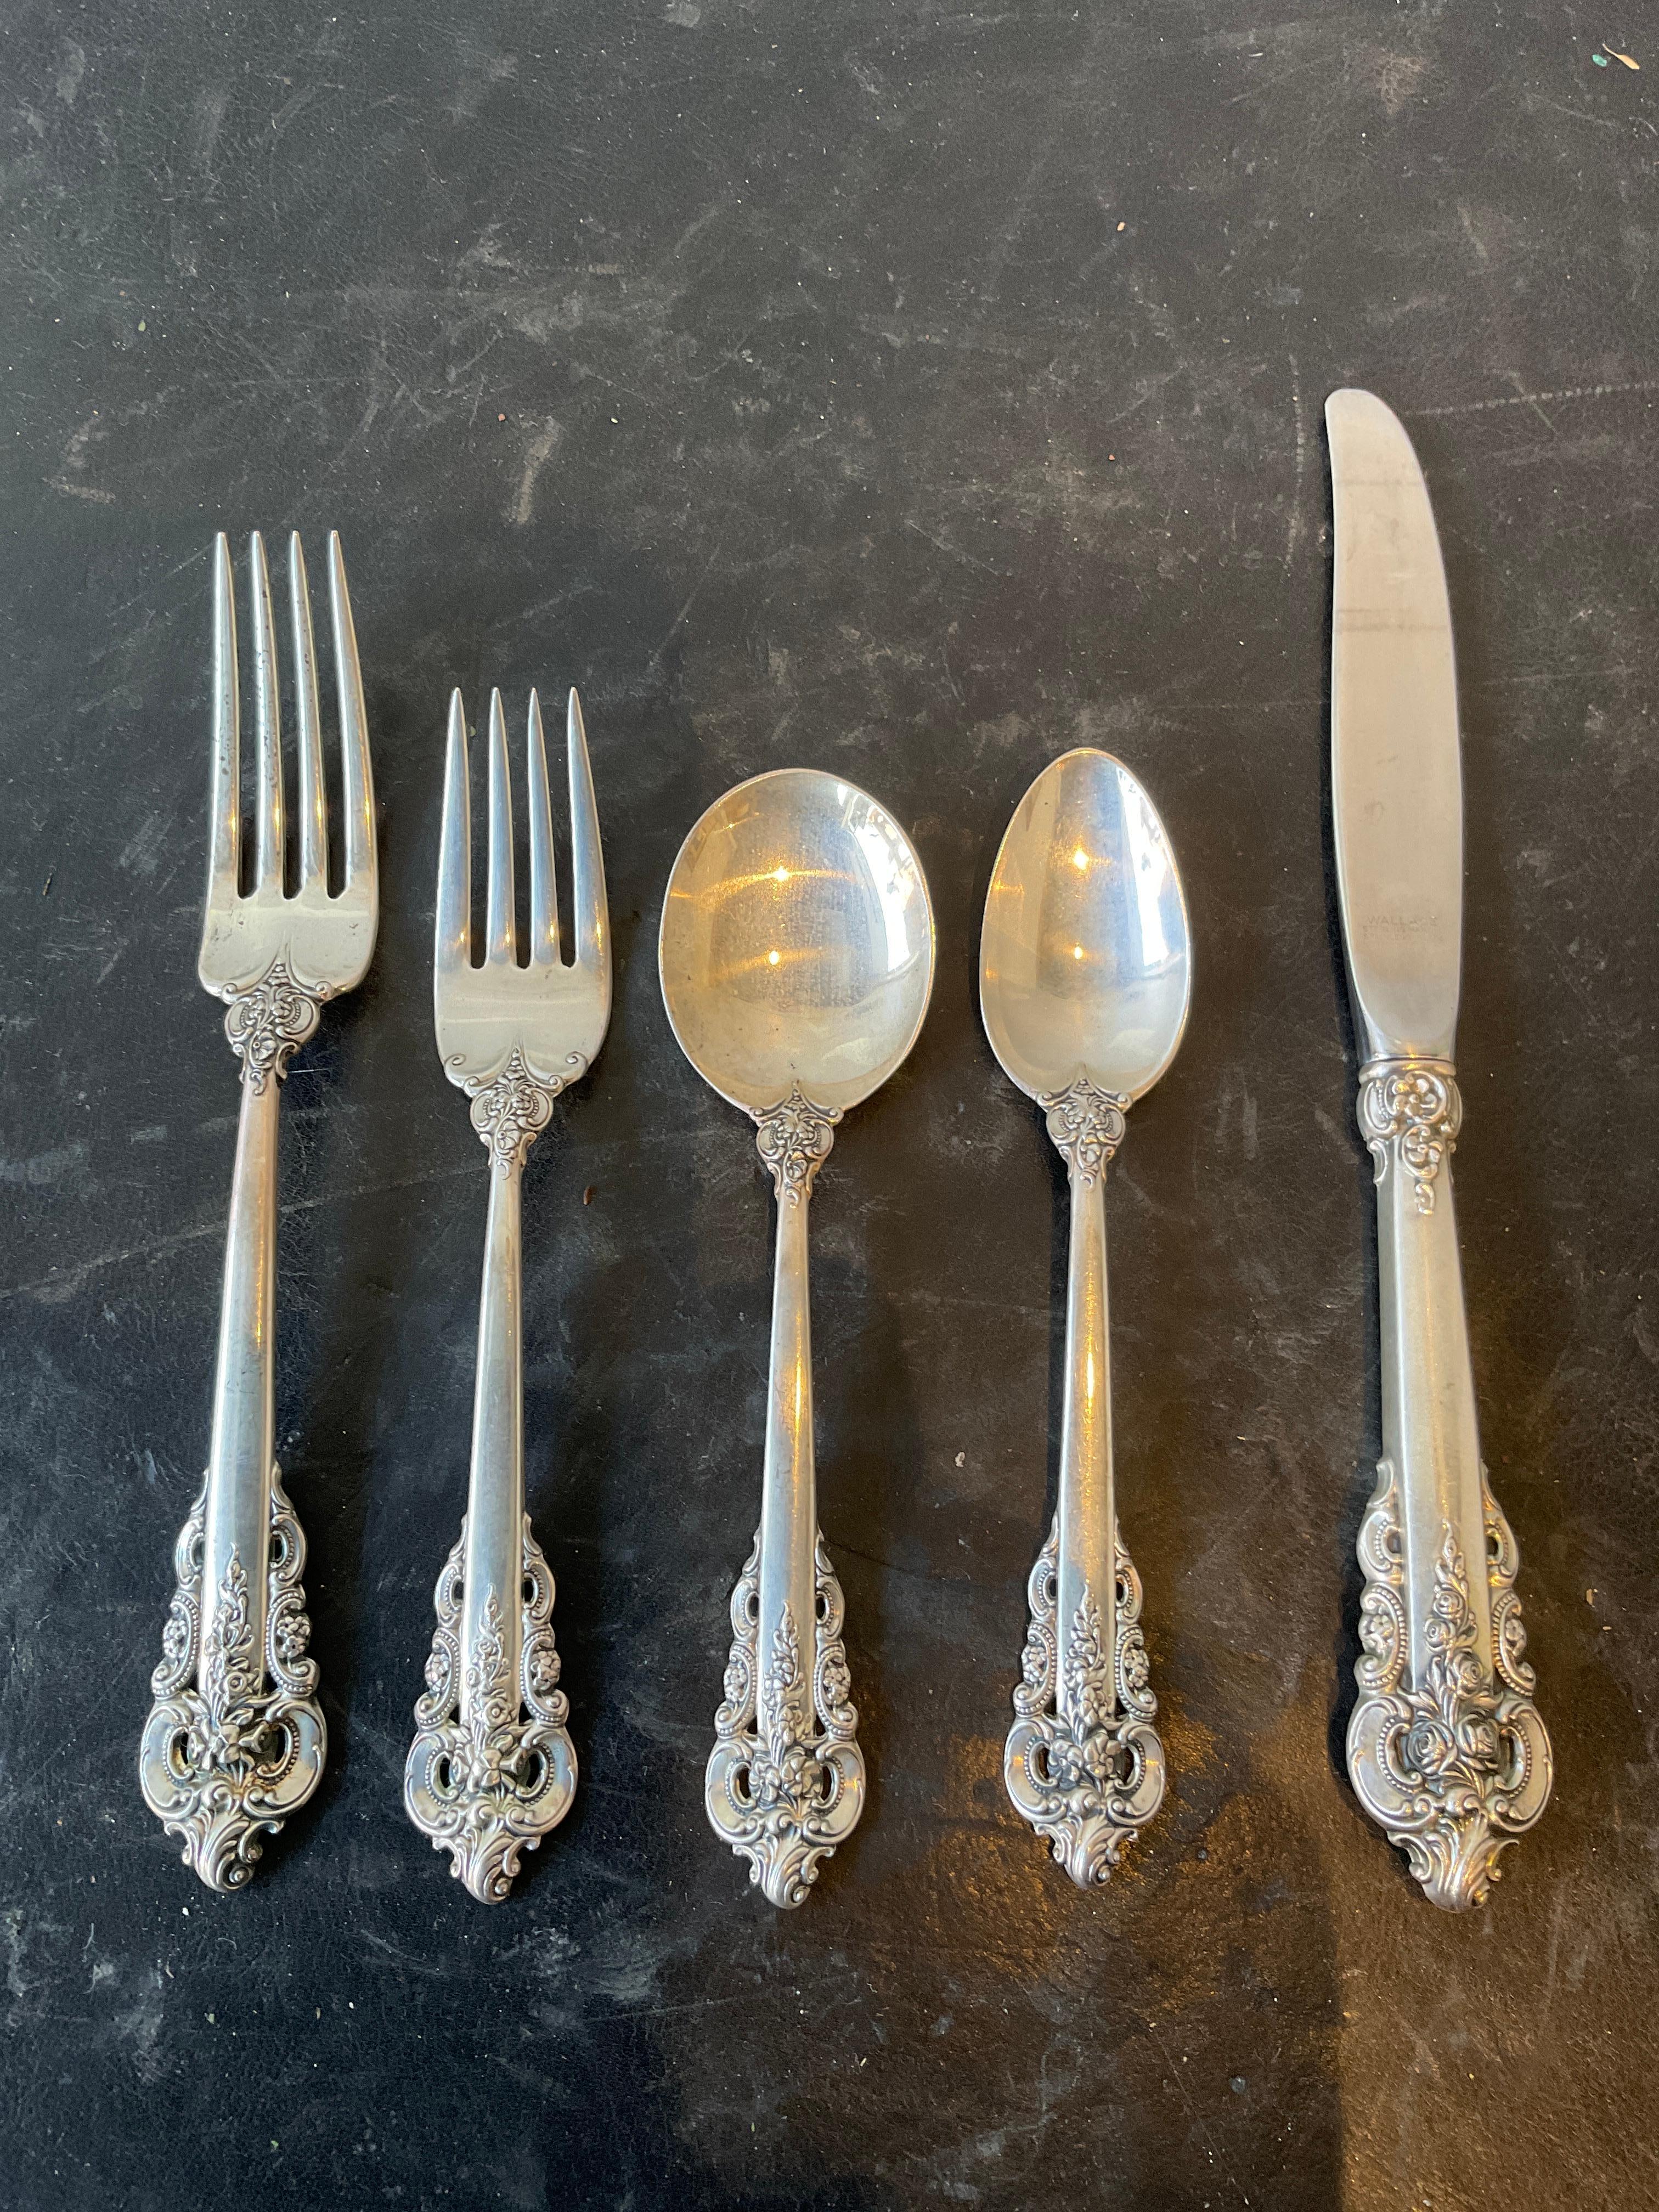 Wallace Sterling  Grande Baroque service for 8. Plus a butter knife and spoon.